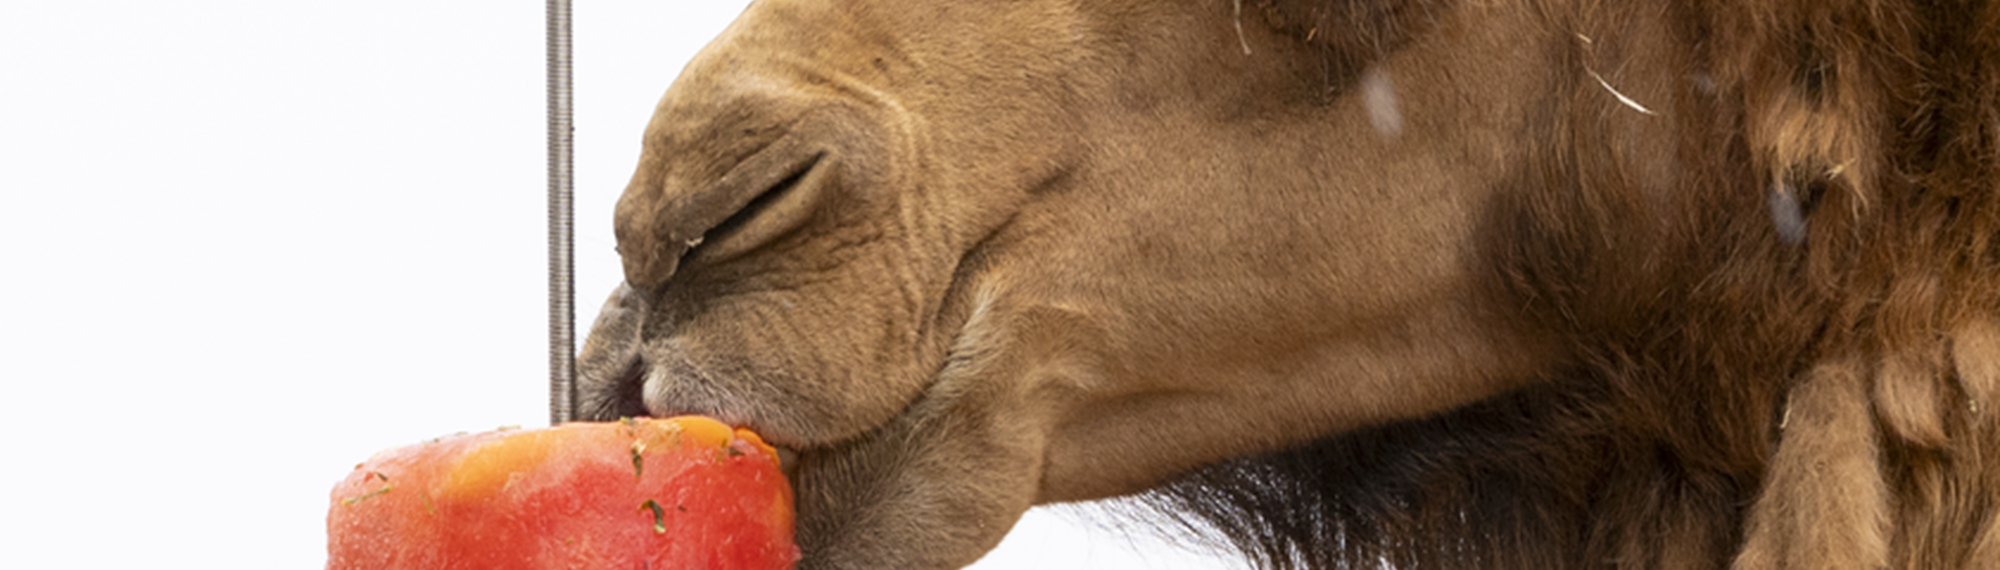 Close-up of a Camel, sucking on a red ice block hung from a wire, seen from their left.